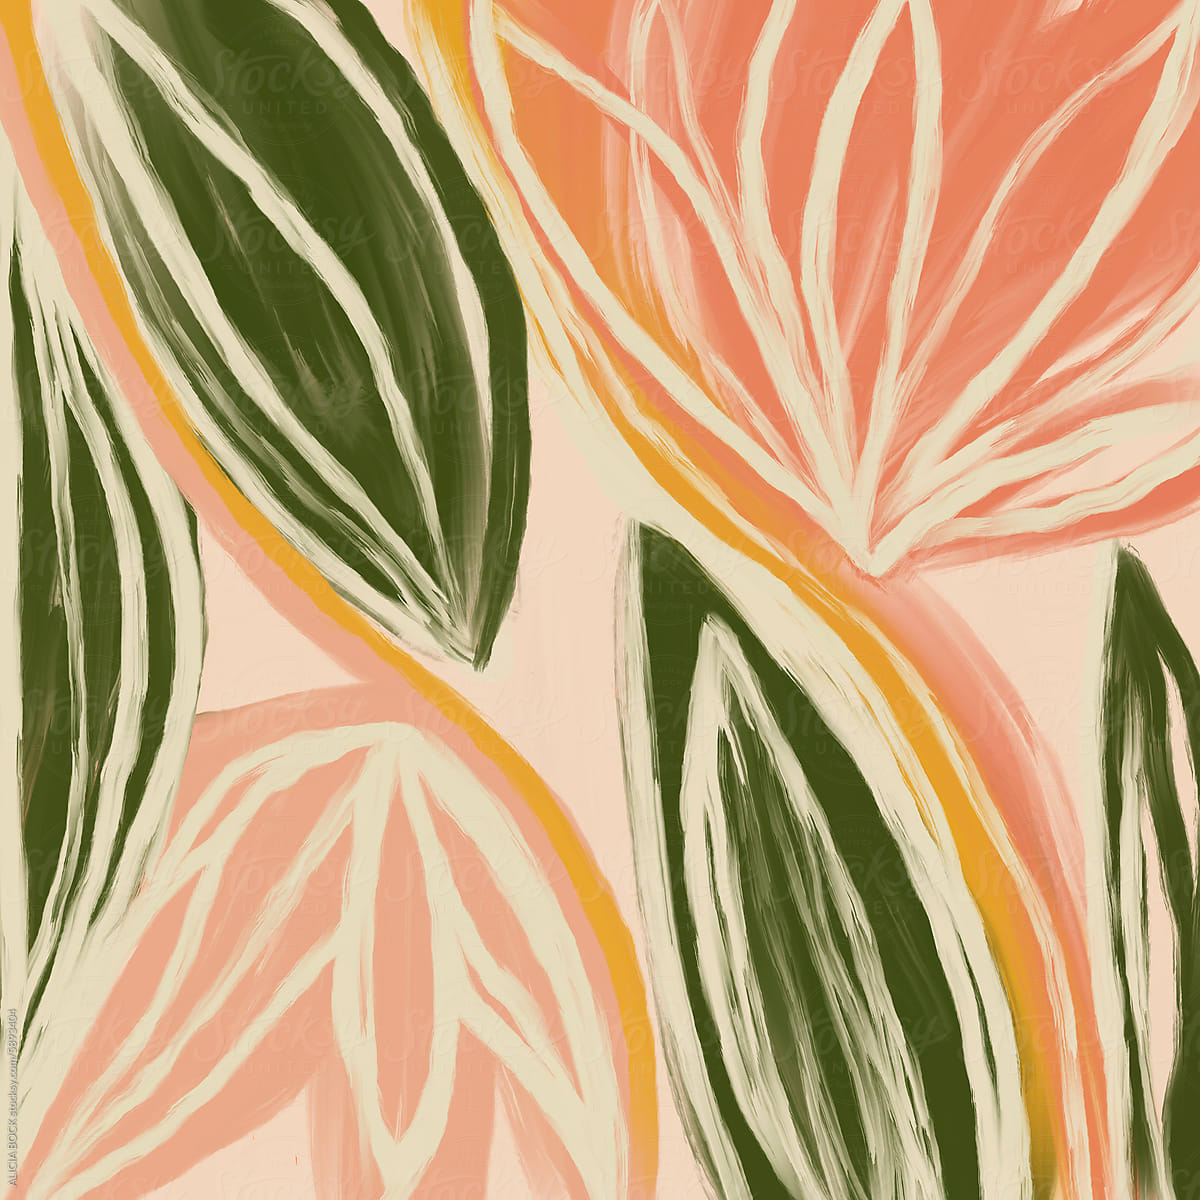 Abstract Floral Illustration In Warm Spring Colors